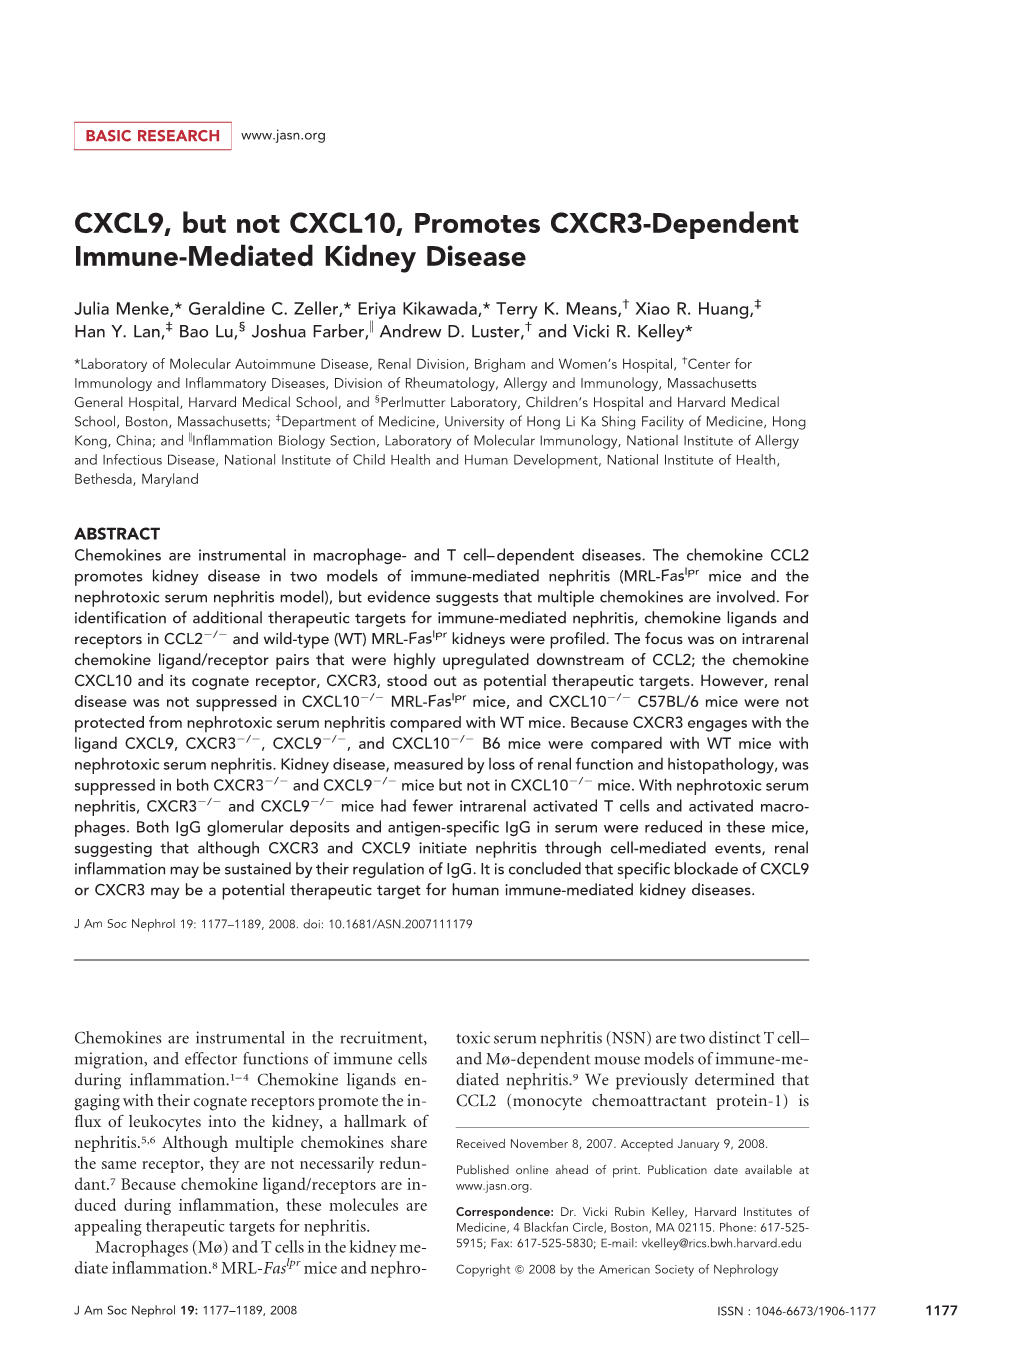 CXCL9, but Not CXCL10, Promotes CXCR3-Dependent Immune-Mediated Kidney Disease